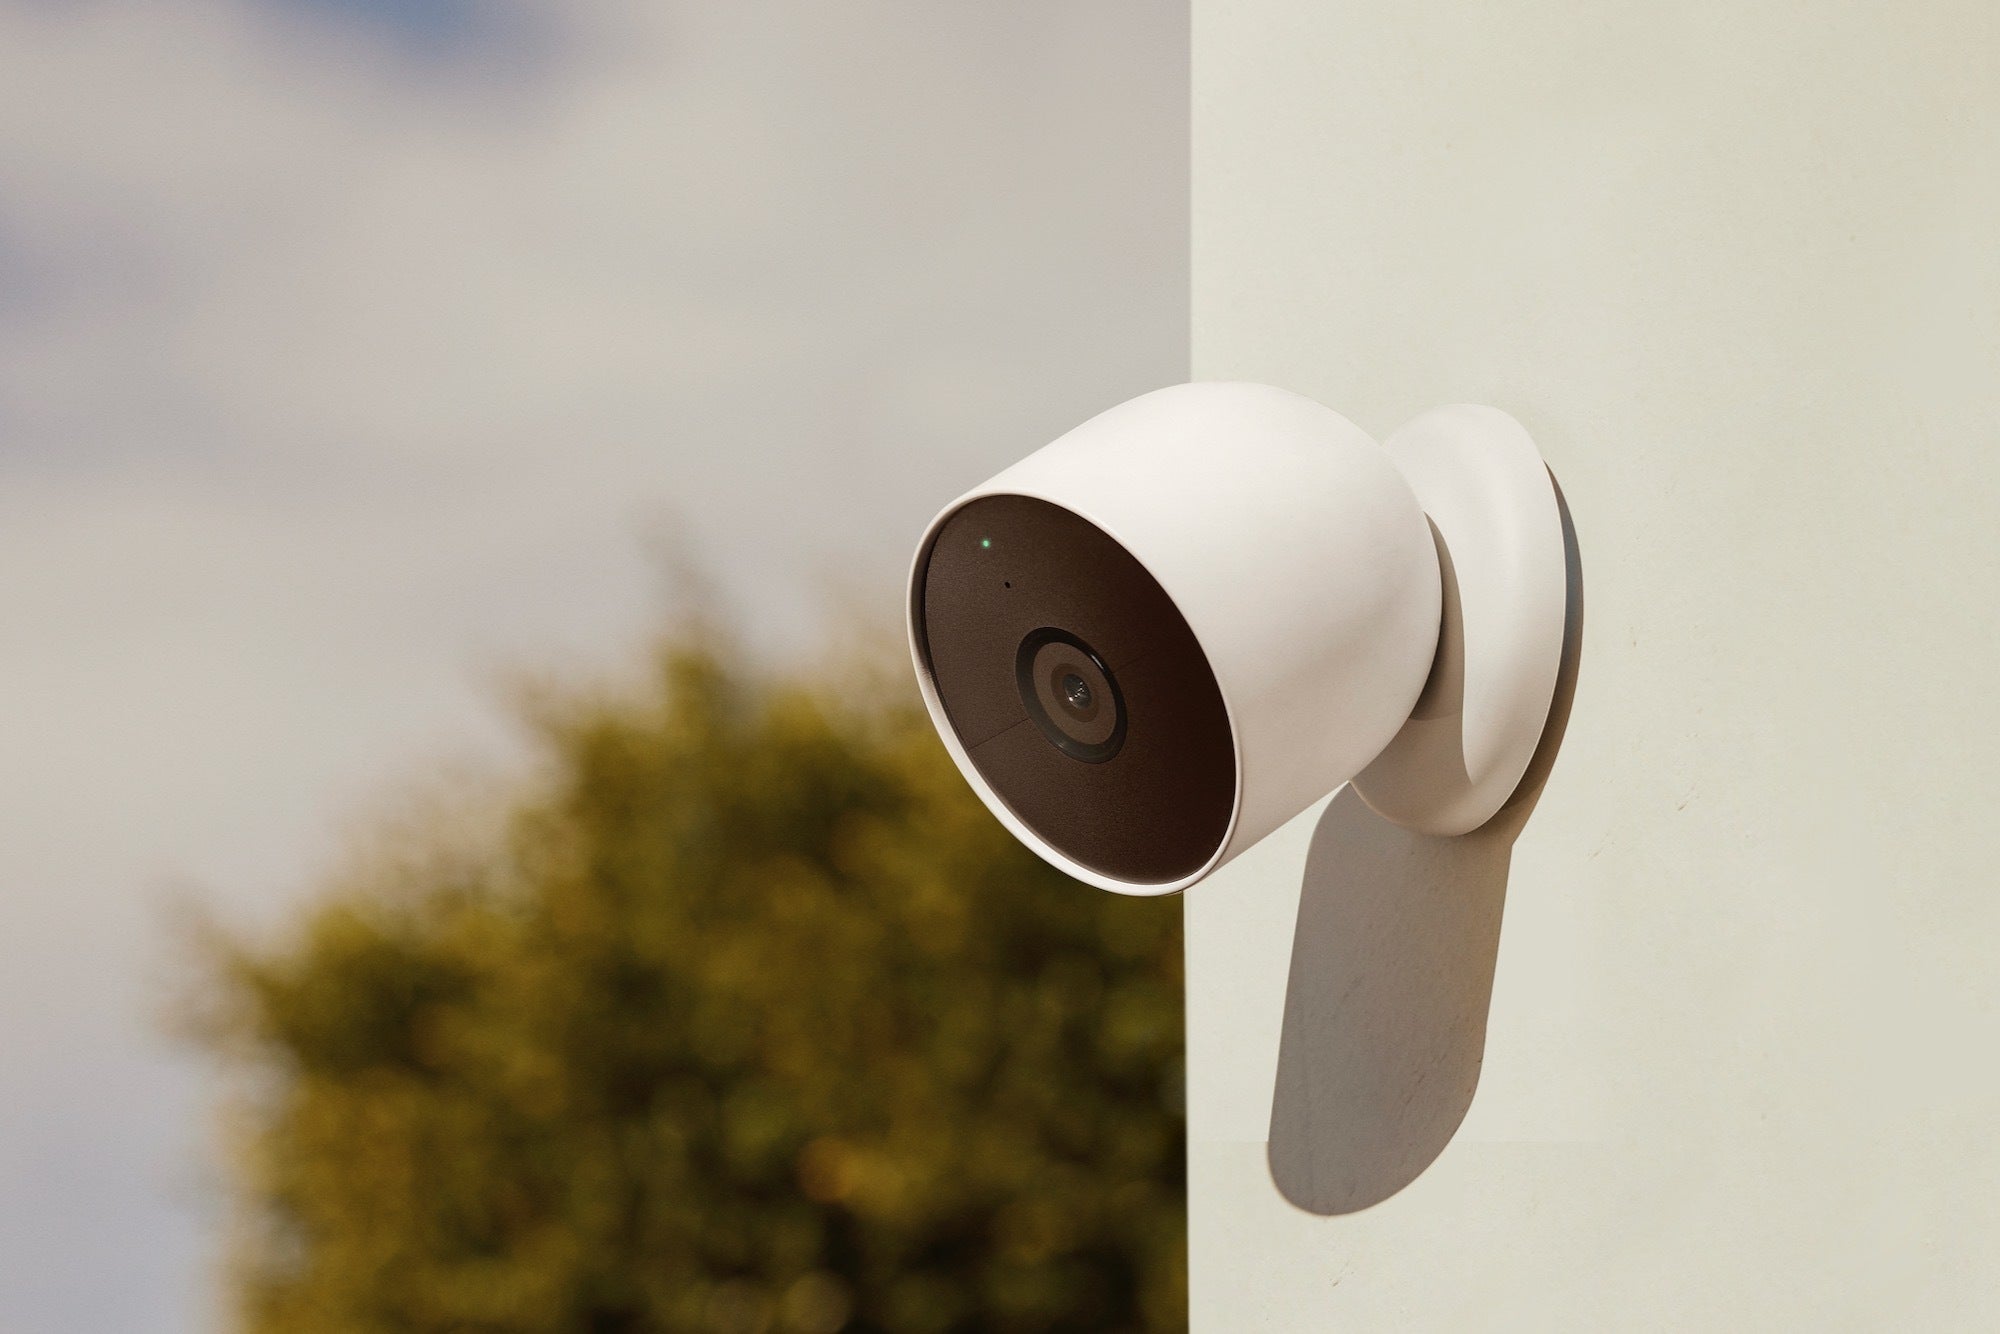 Do doorbell cameras record all the time?